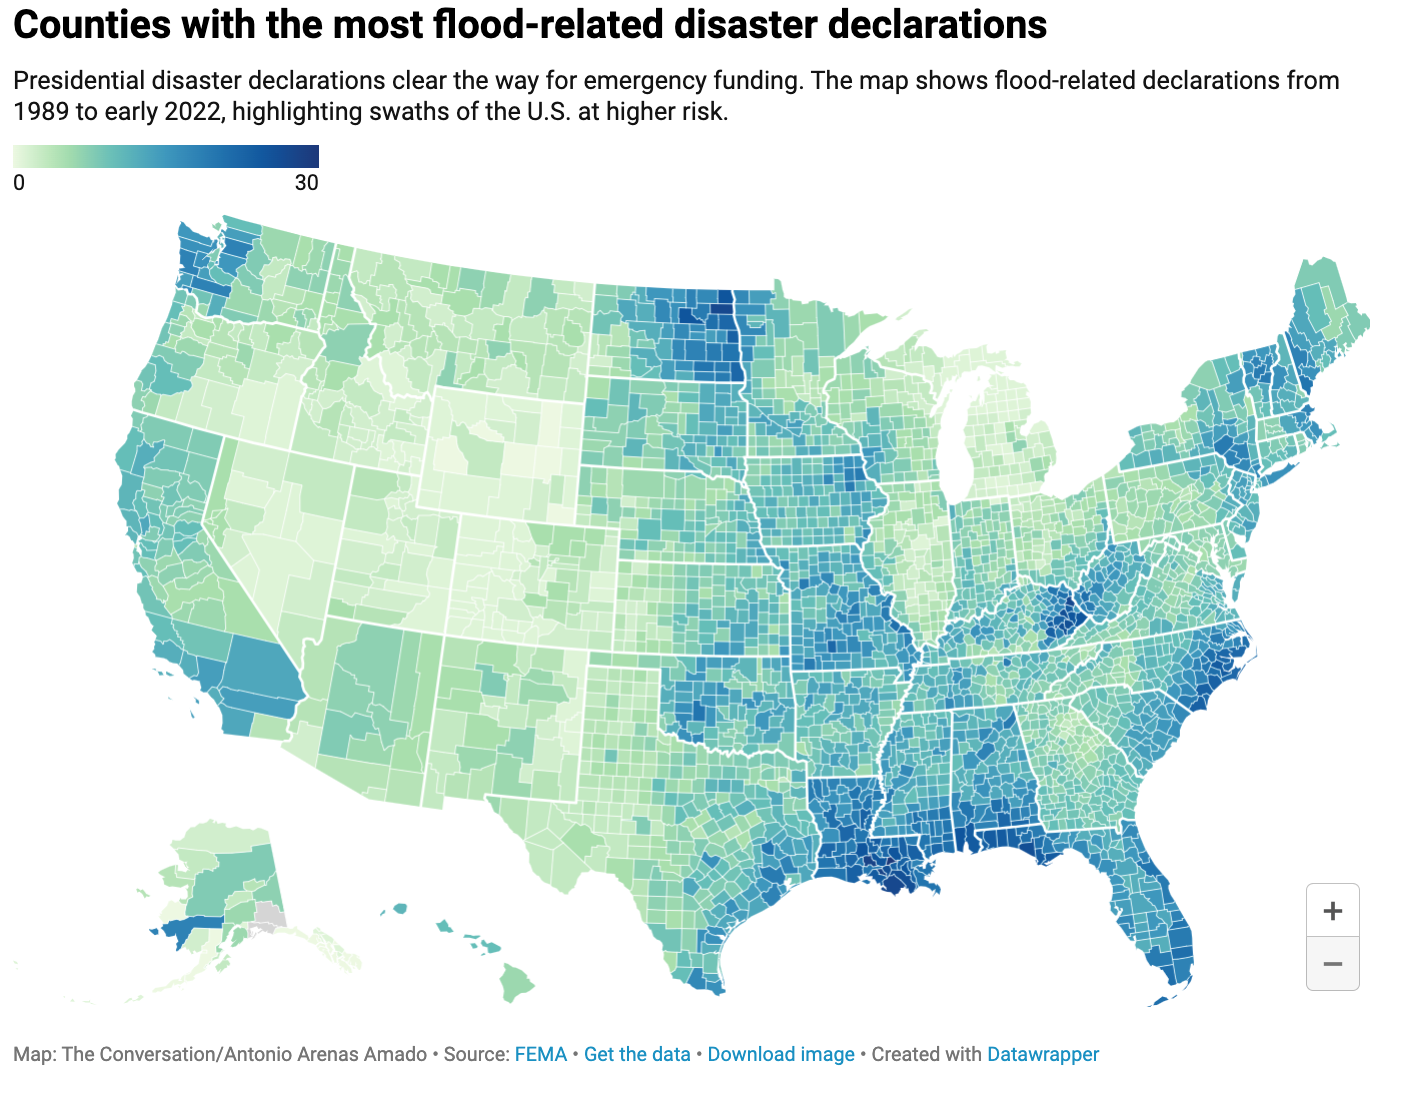 Counties with the most flood-related disaster declarations (Source: The Conversation)